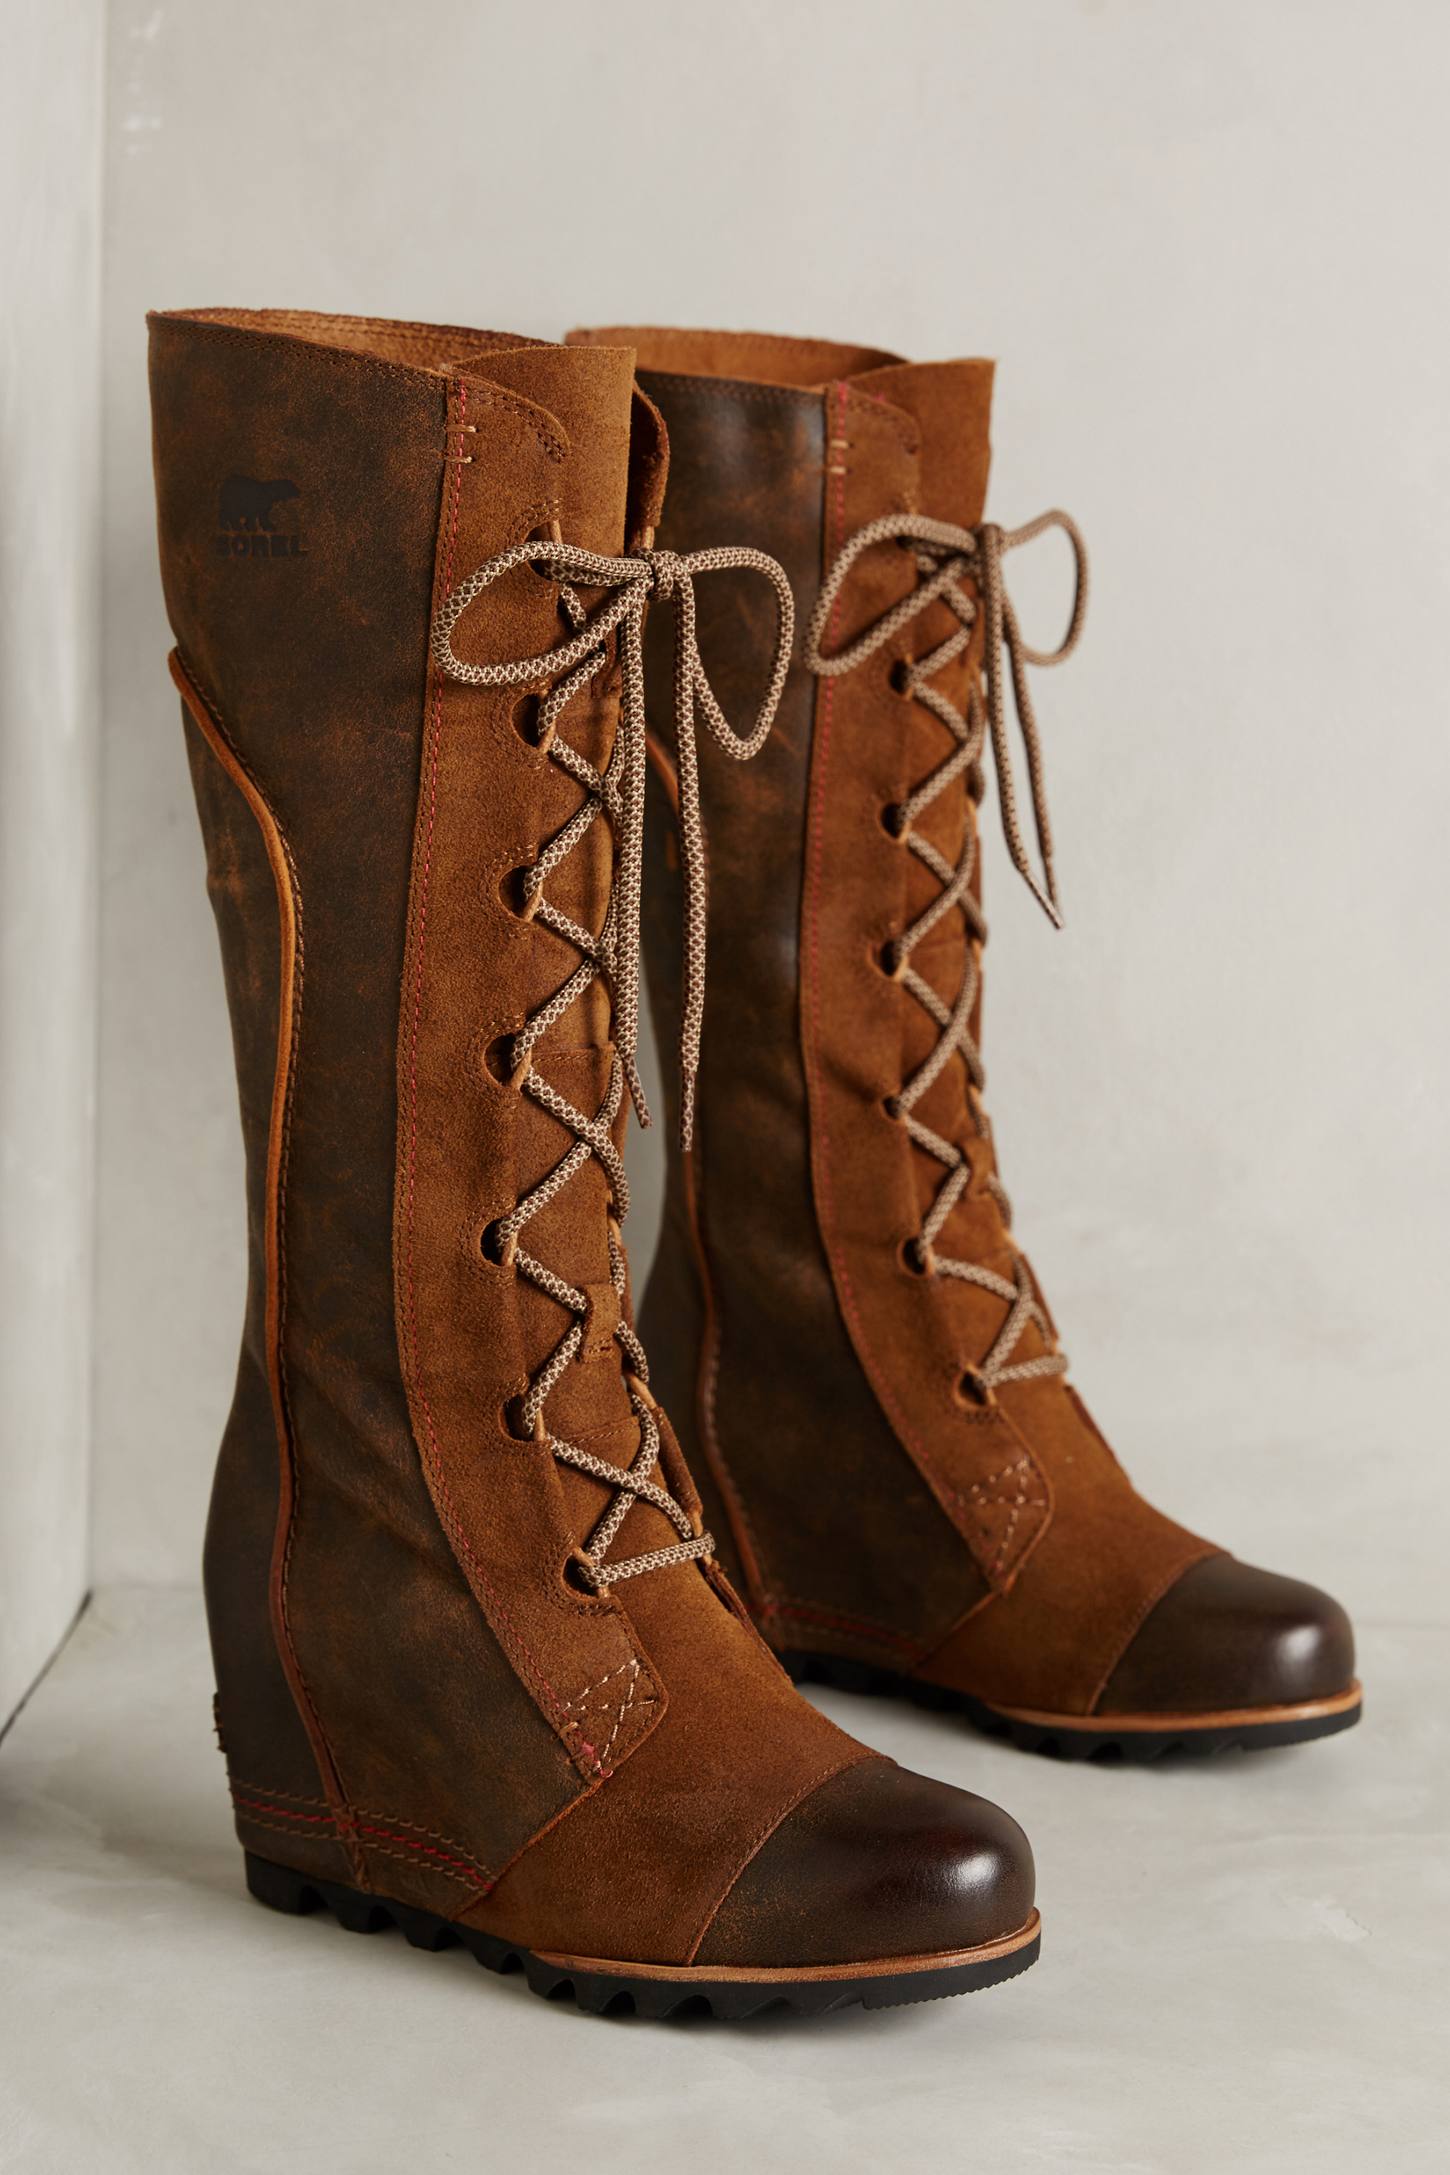 Sorel Cate The Great Wedge Boots